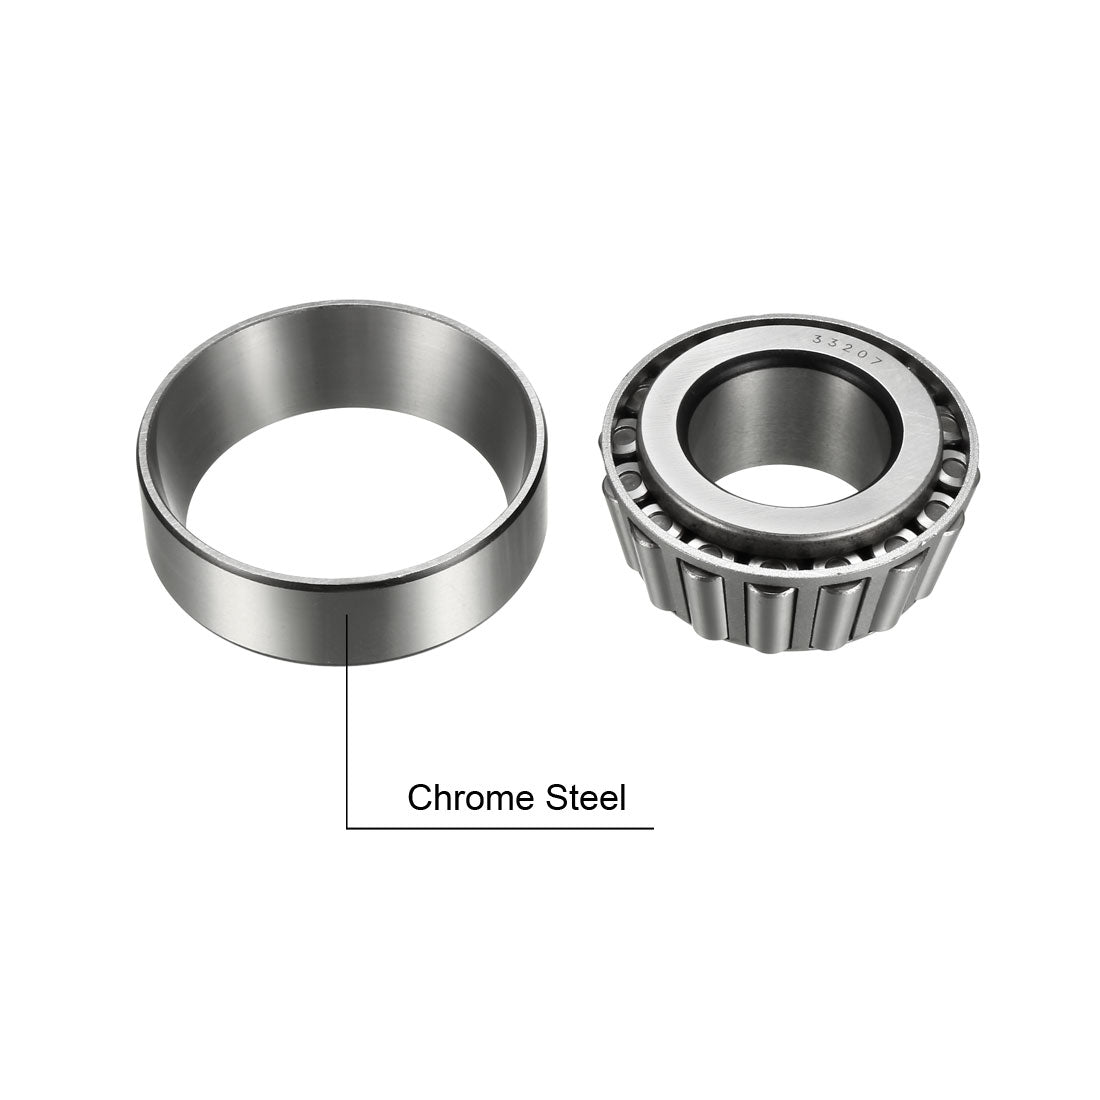 Uxcell Uxcell 30208M Tapered Roller Bearing Cone and Cup Set 40mm Bore 80mm O.D. 20mm Width